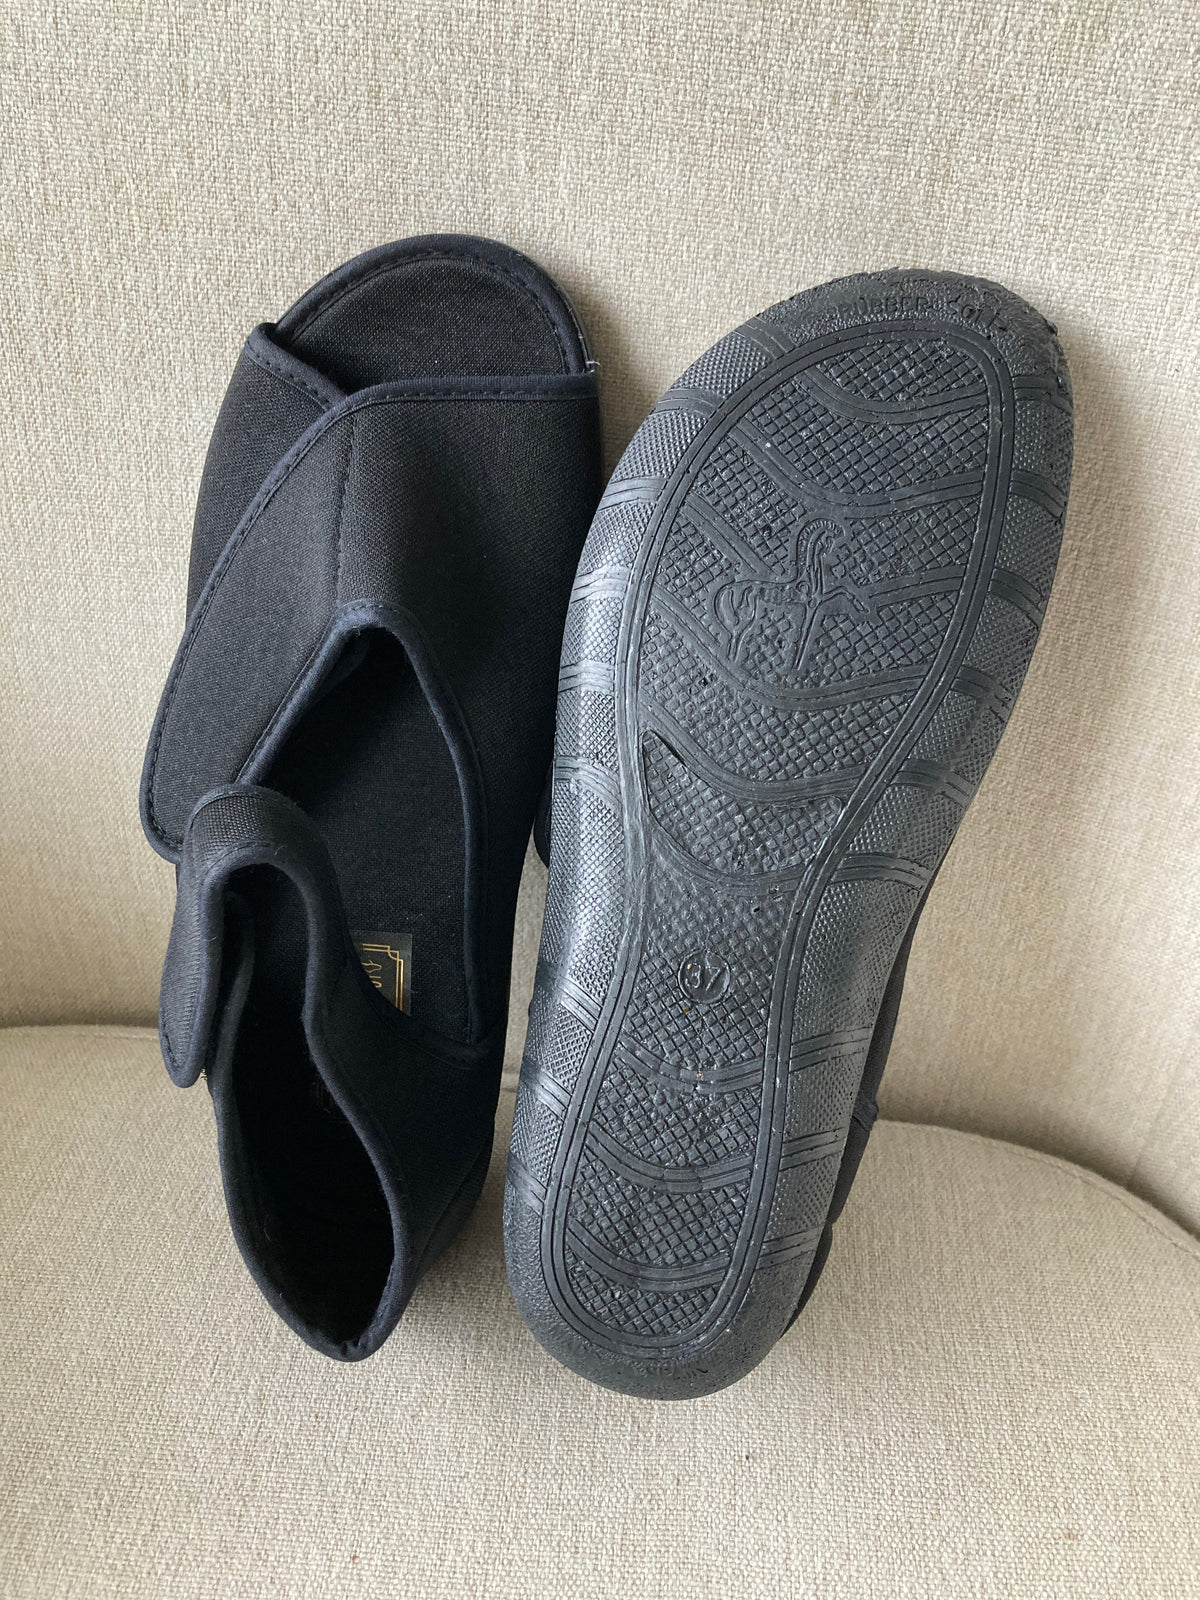 Velcro comfort sandals by Natural size 4